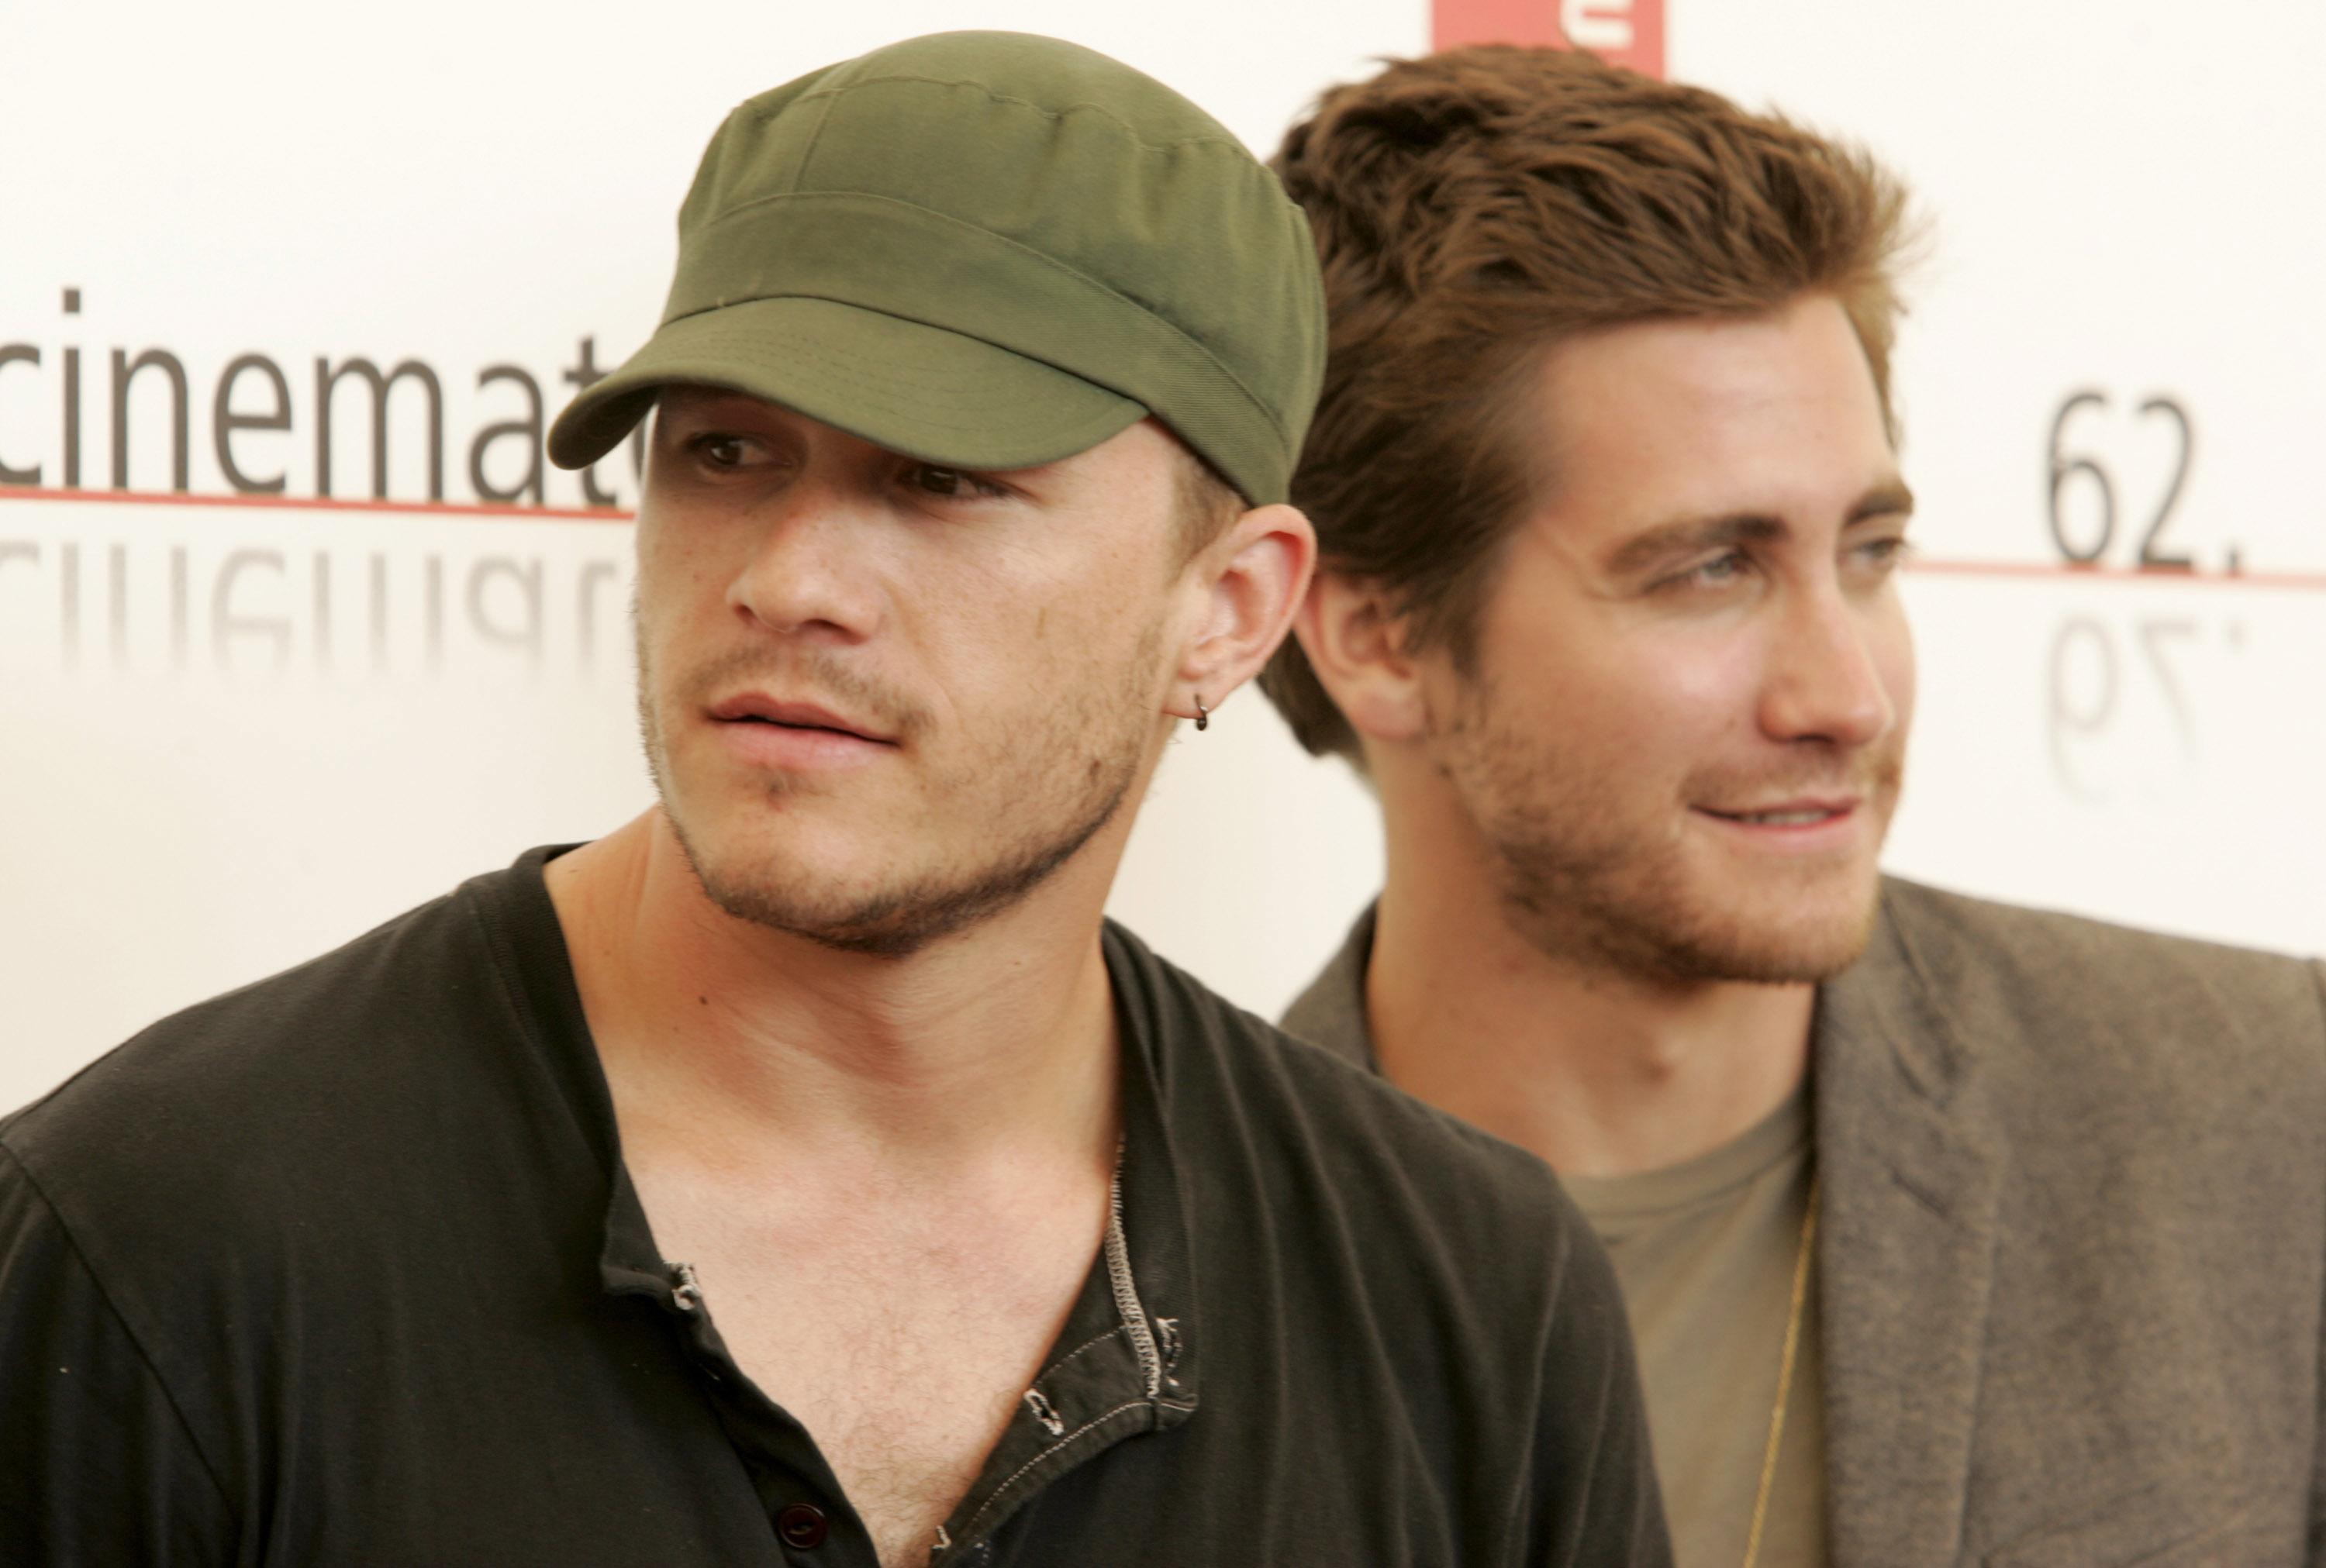 Heath in a cap and Jake with stubble, both casually dressed at a media event